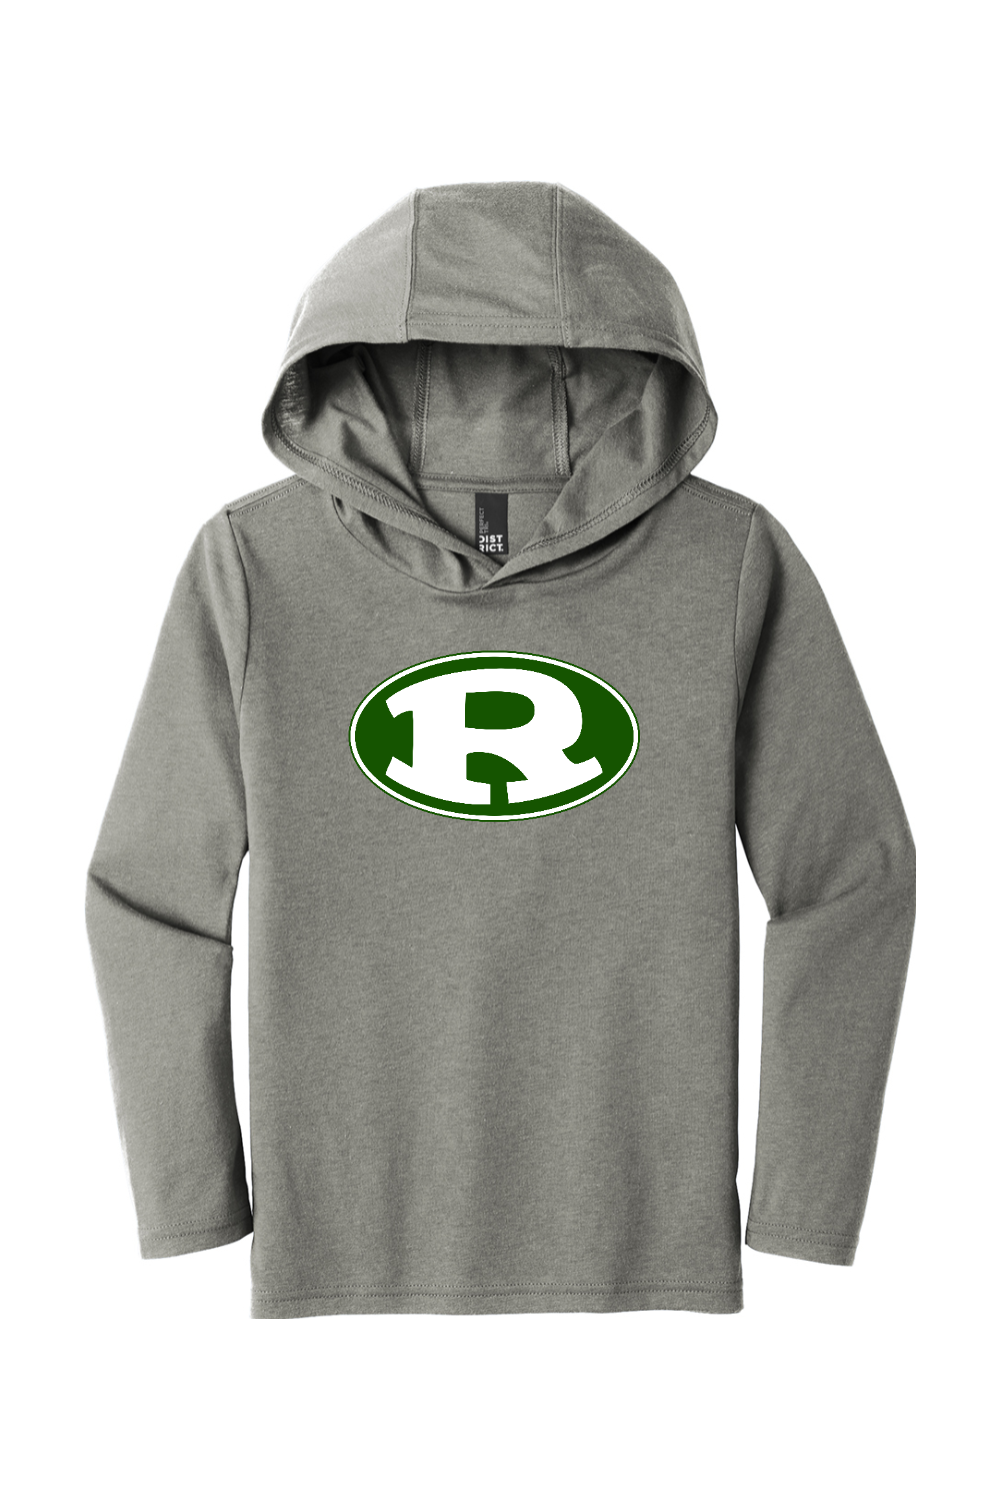 Ridley R District Youth Perfect Tri Long Sleeve Hoodie